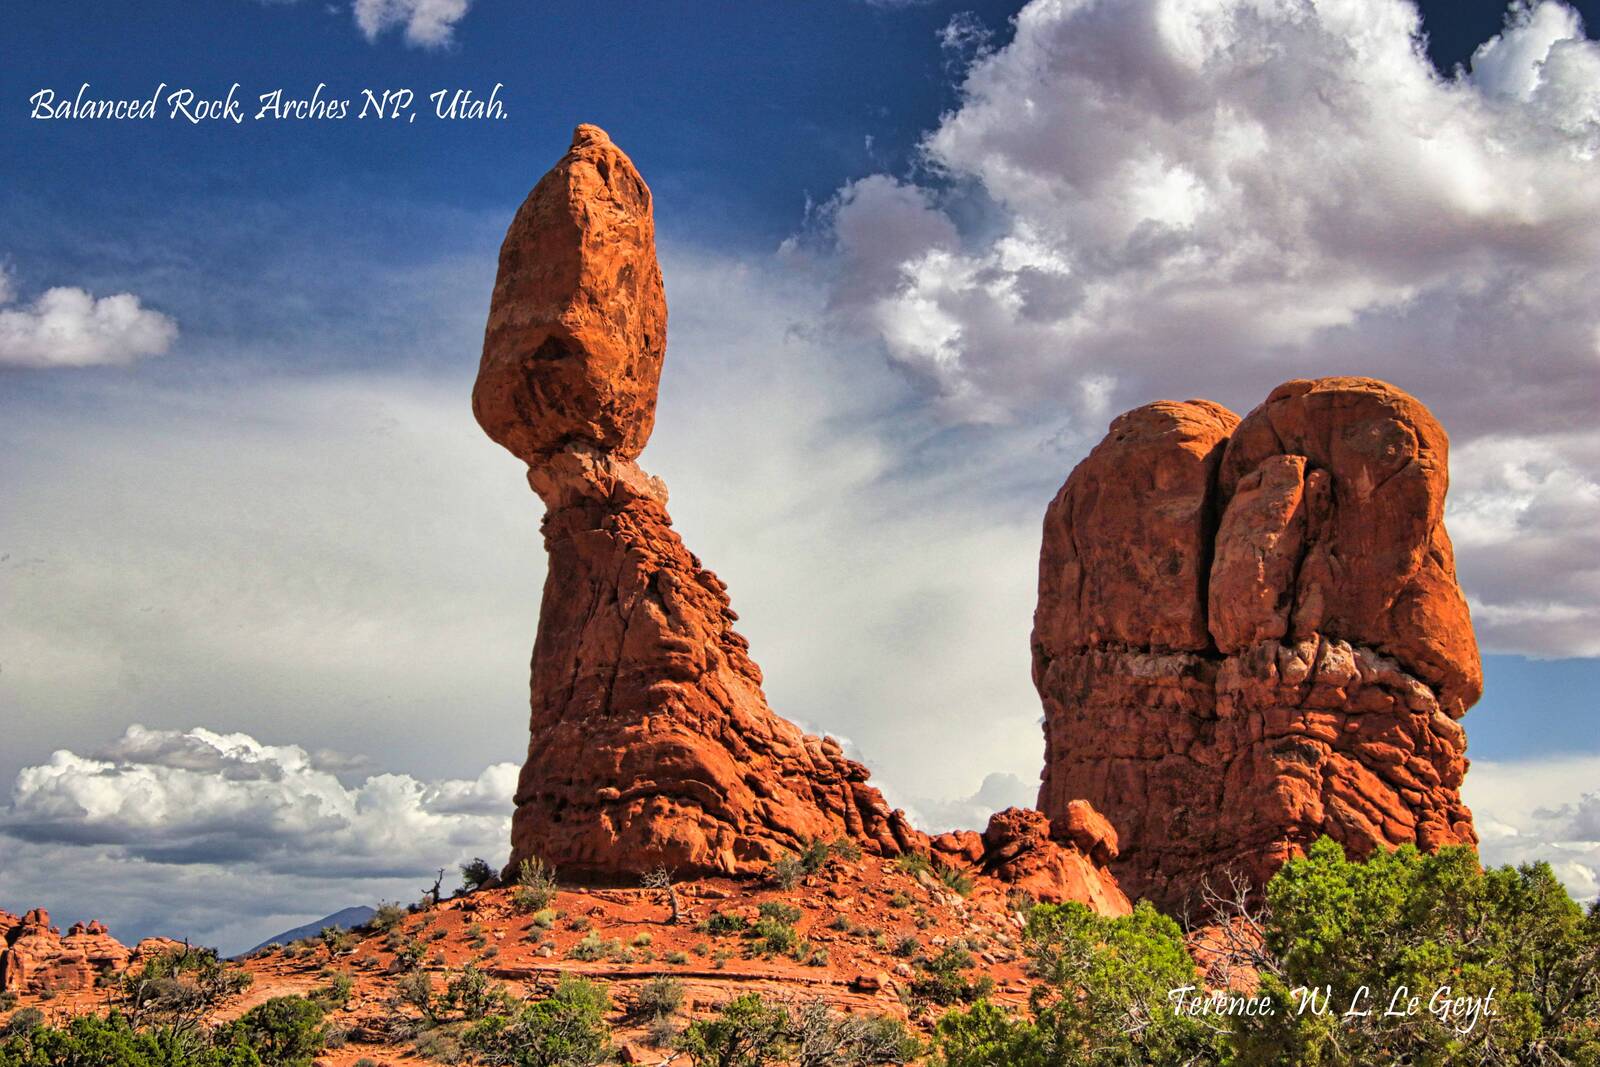 Image of Balanced Rock, Arches NP by Terry Leg